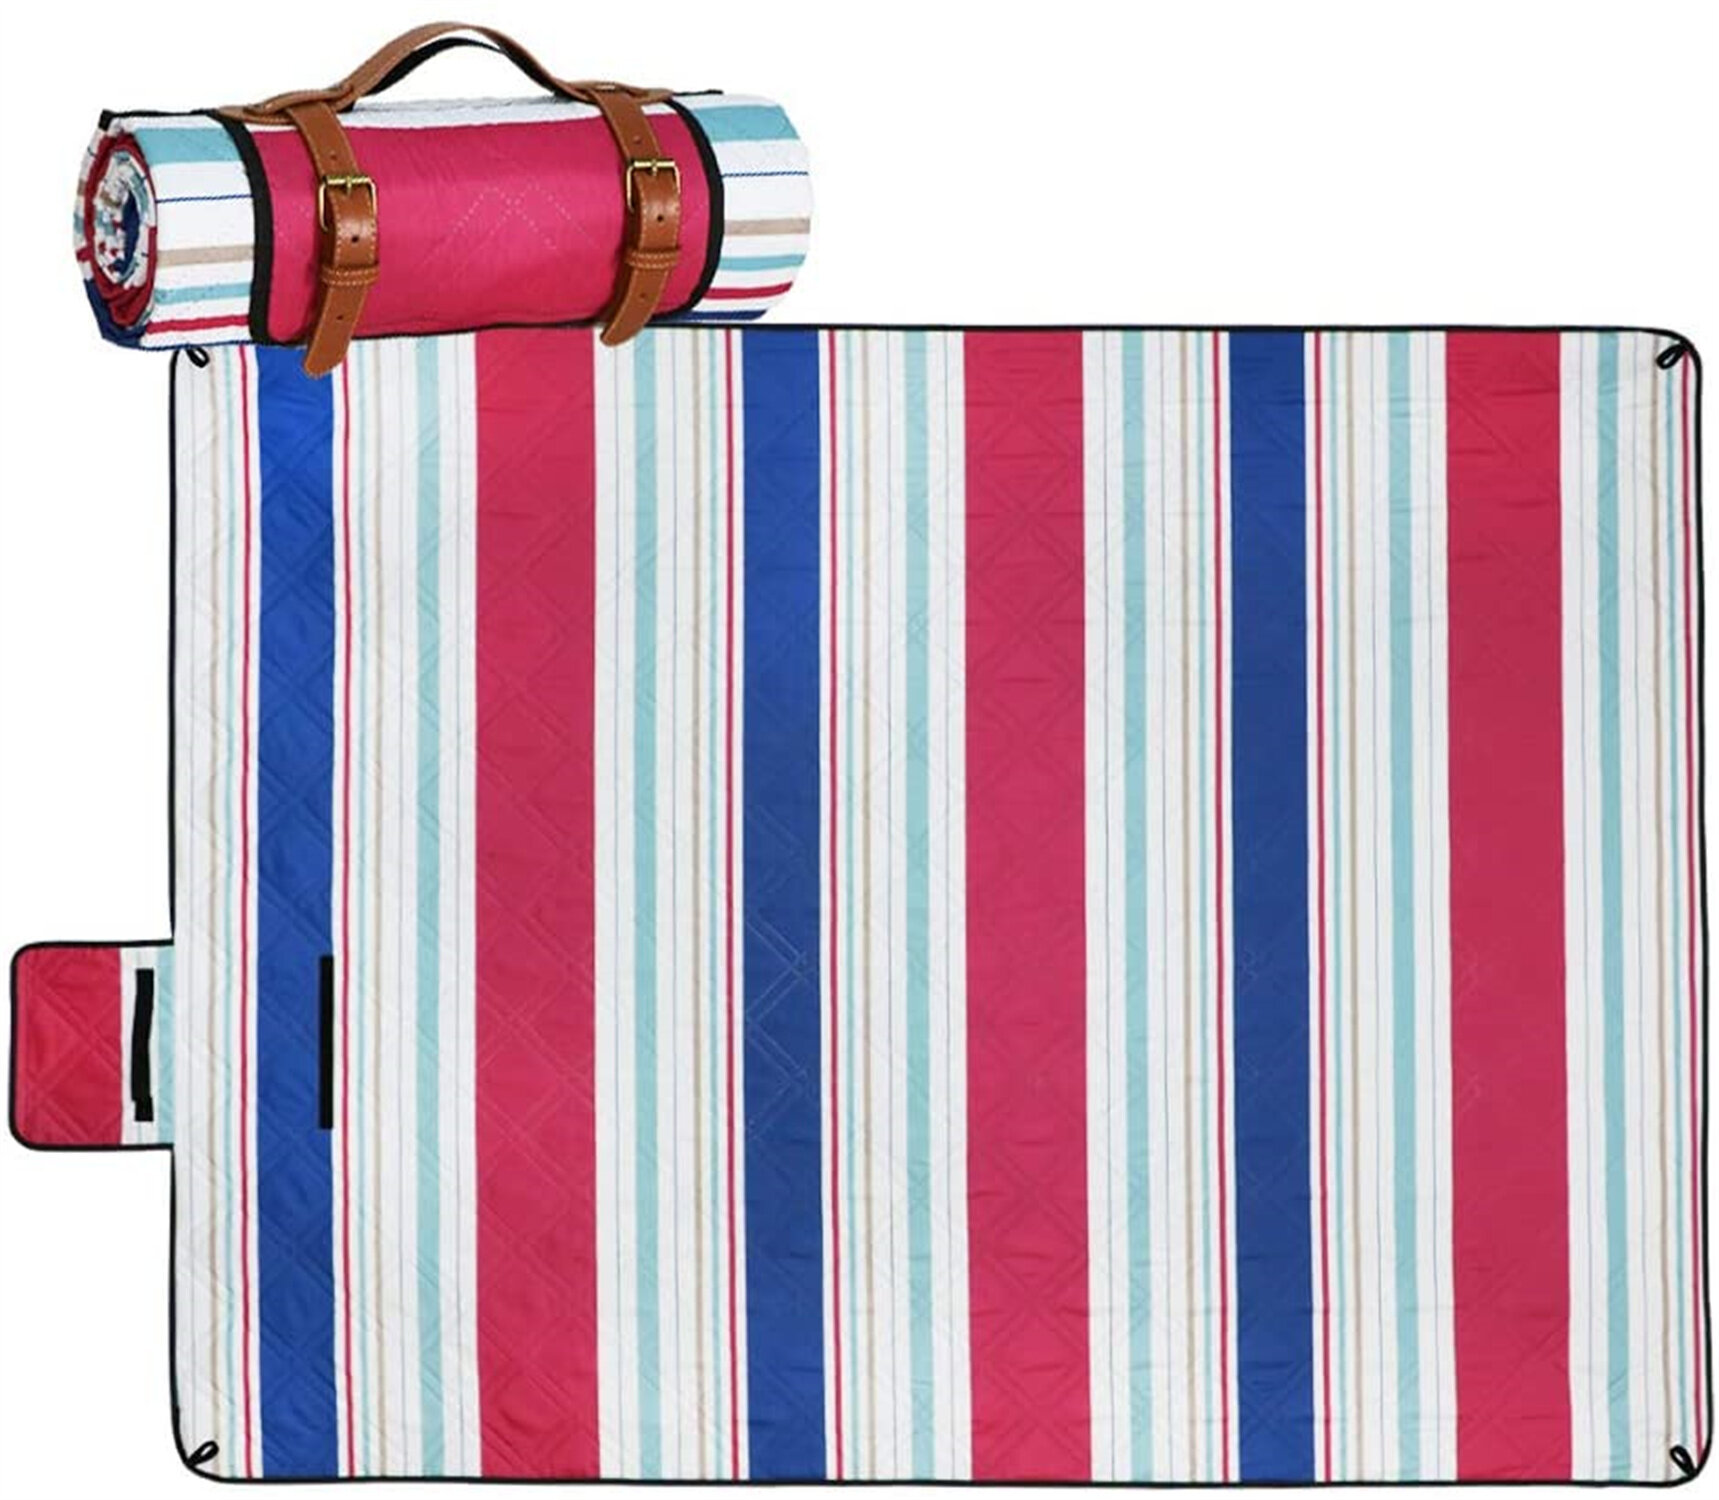 Large Fold Away Picnic Blanket Ideal For The Outdoor Countryside And Beaches